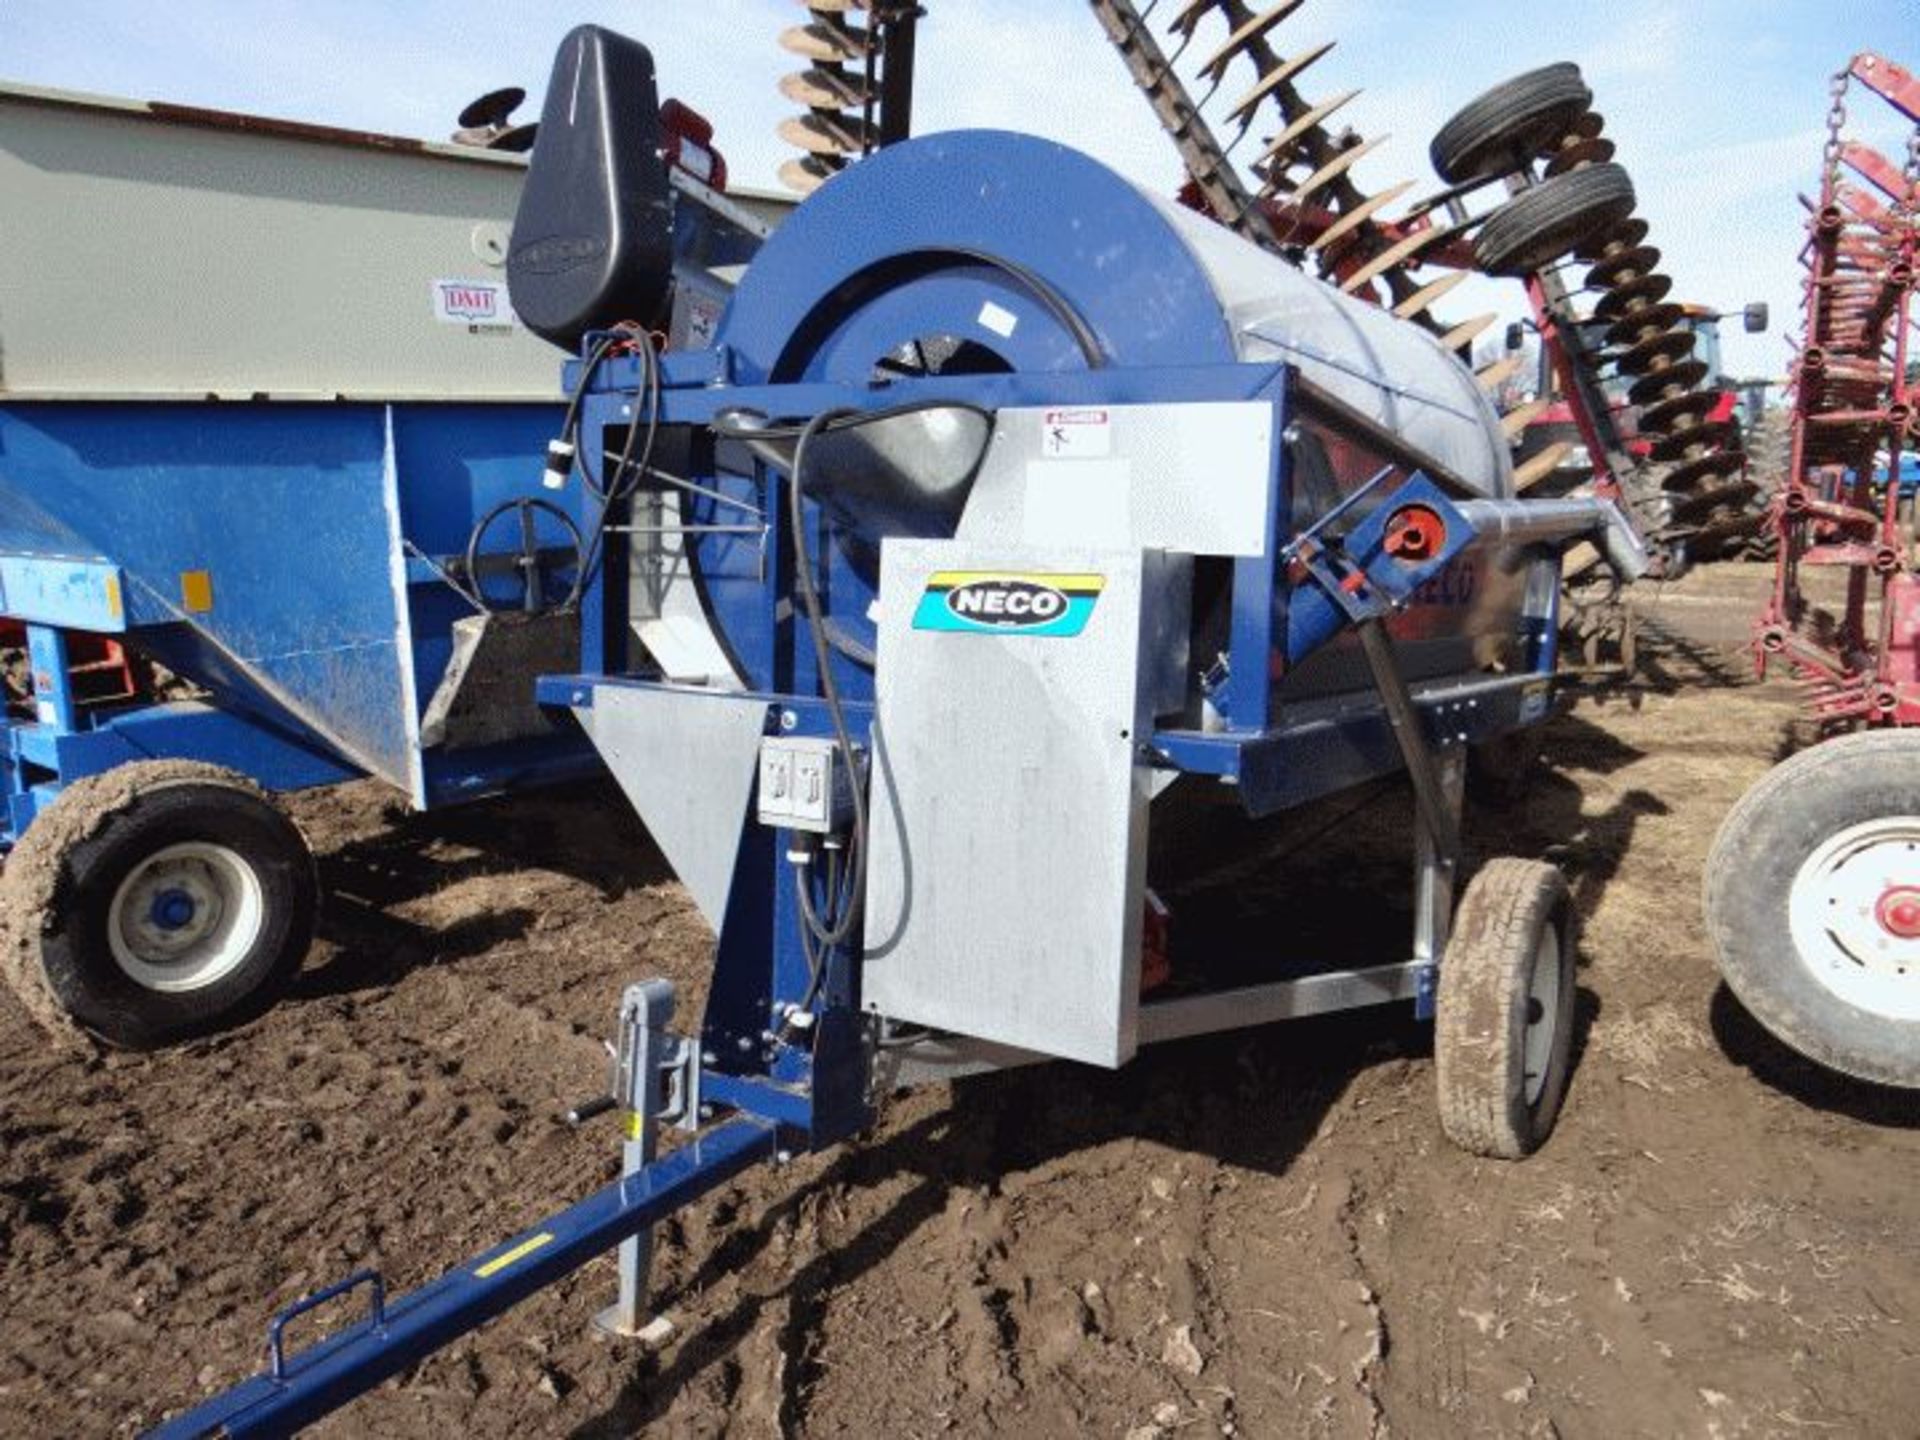 Lot # 2310 New Neco Rotary Grain Cleaner Elec Motor, Auger for In Grain and Out Grain, Neven Been